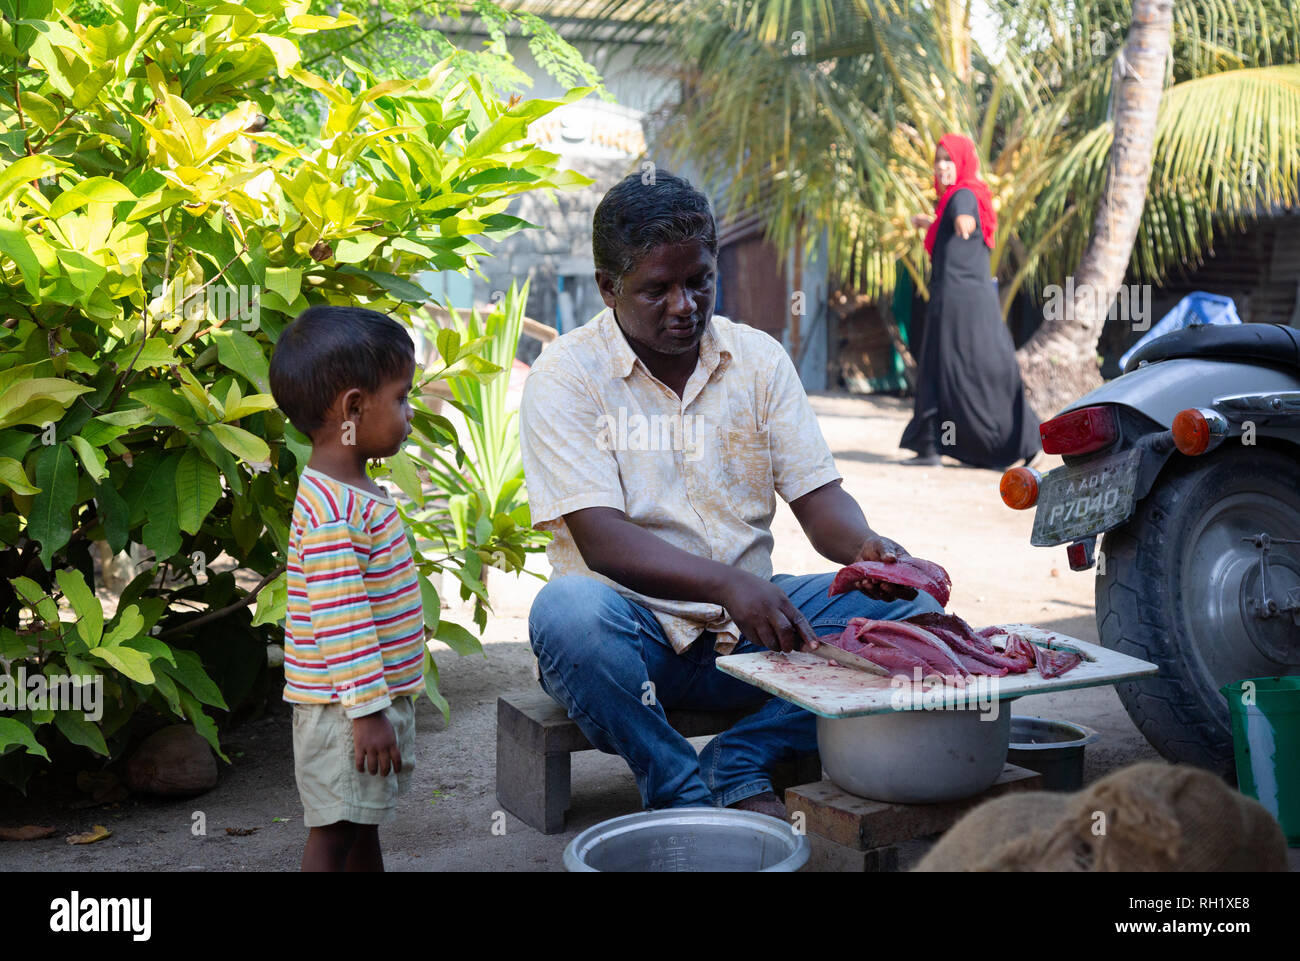 Muslim family - a father prepares fish for a meal watched by his young son and wife,  Ukulhas island, Alif Alif atoll, the Maldives, Asia Stock Photo